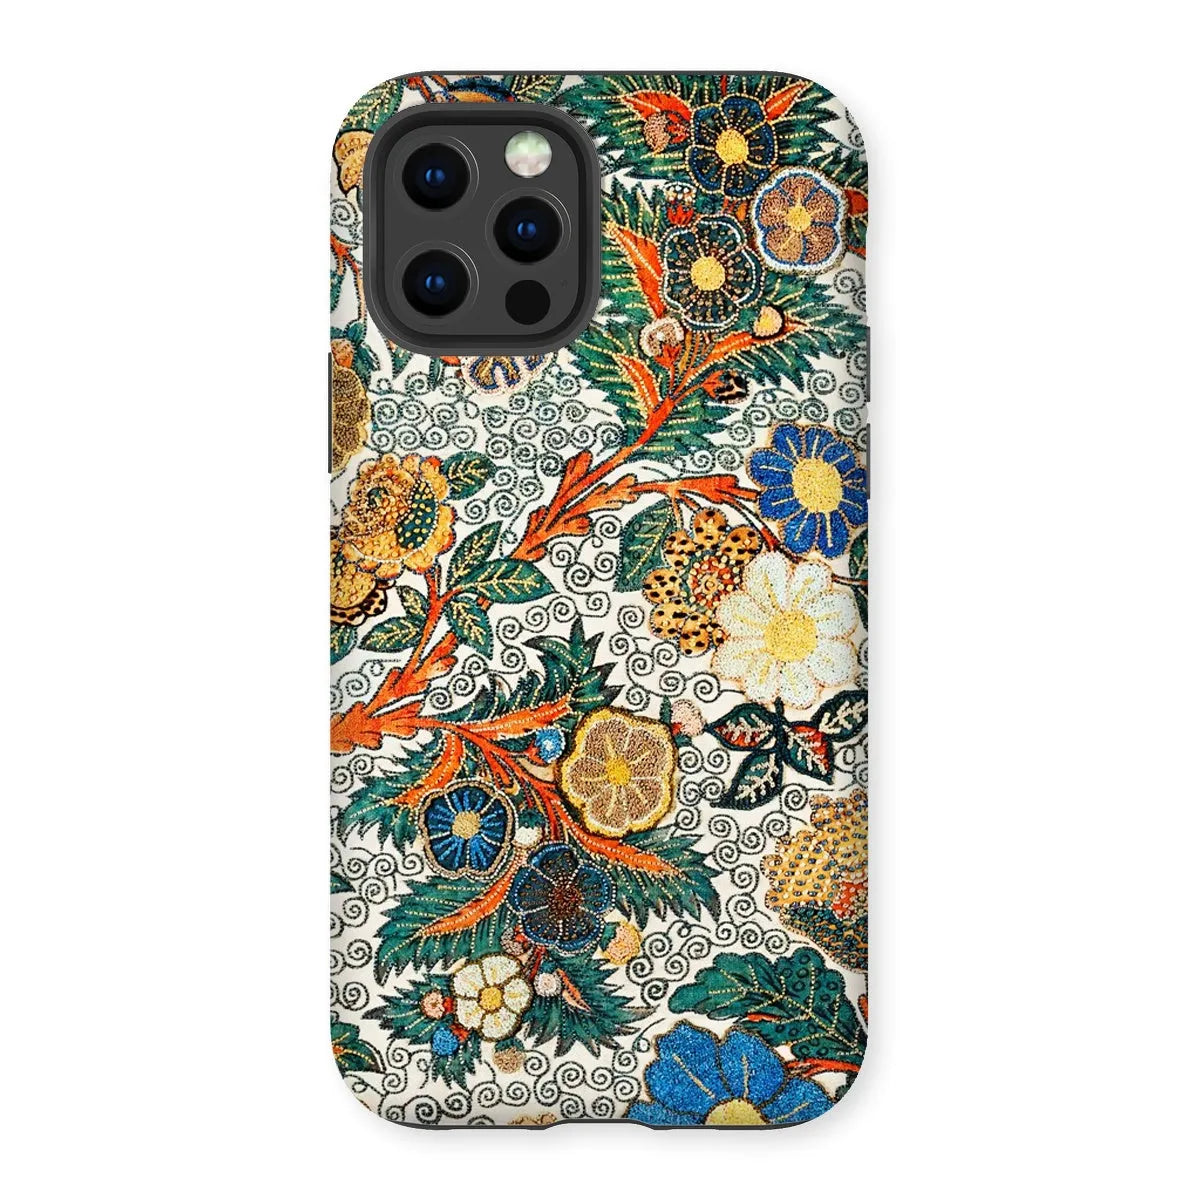 Blossomewhere Japanese Tapestry Art Phone Case - Iphone 12 Pro / Matte - Mobile Phone Cases - Aesthetic Art